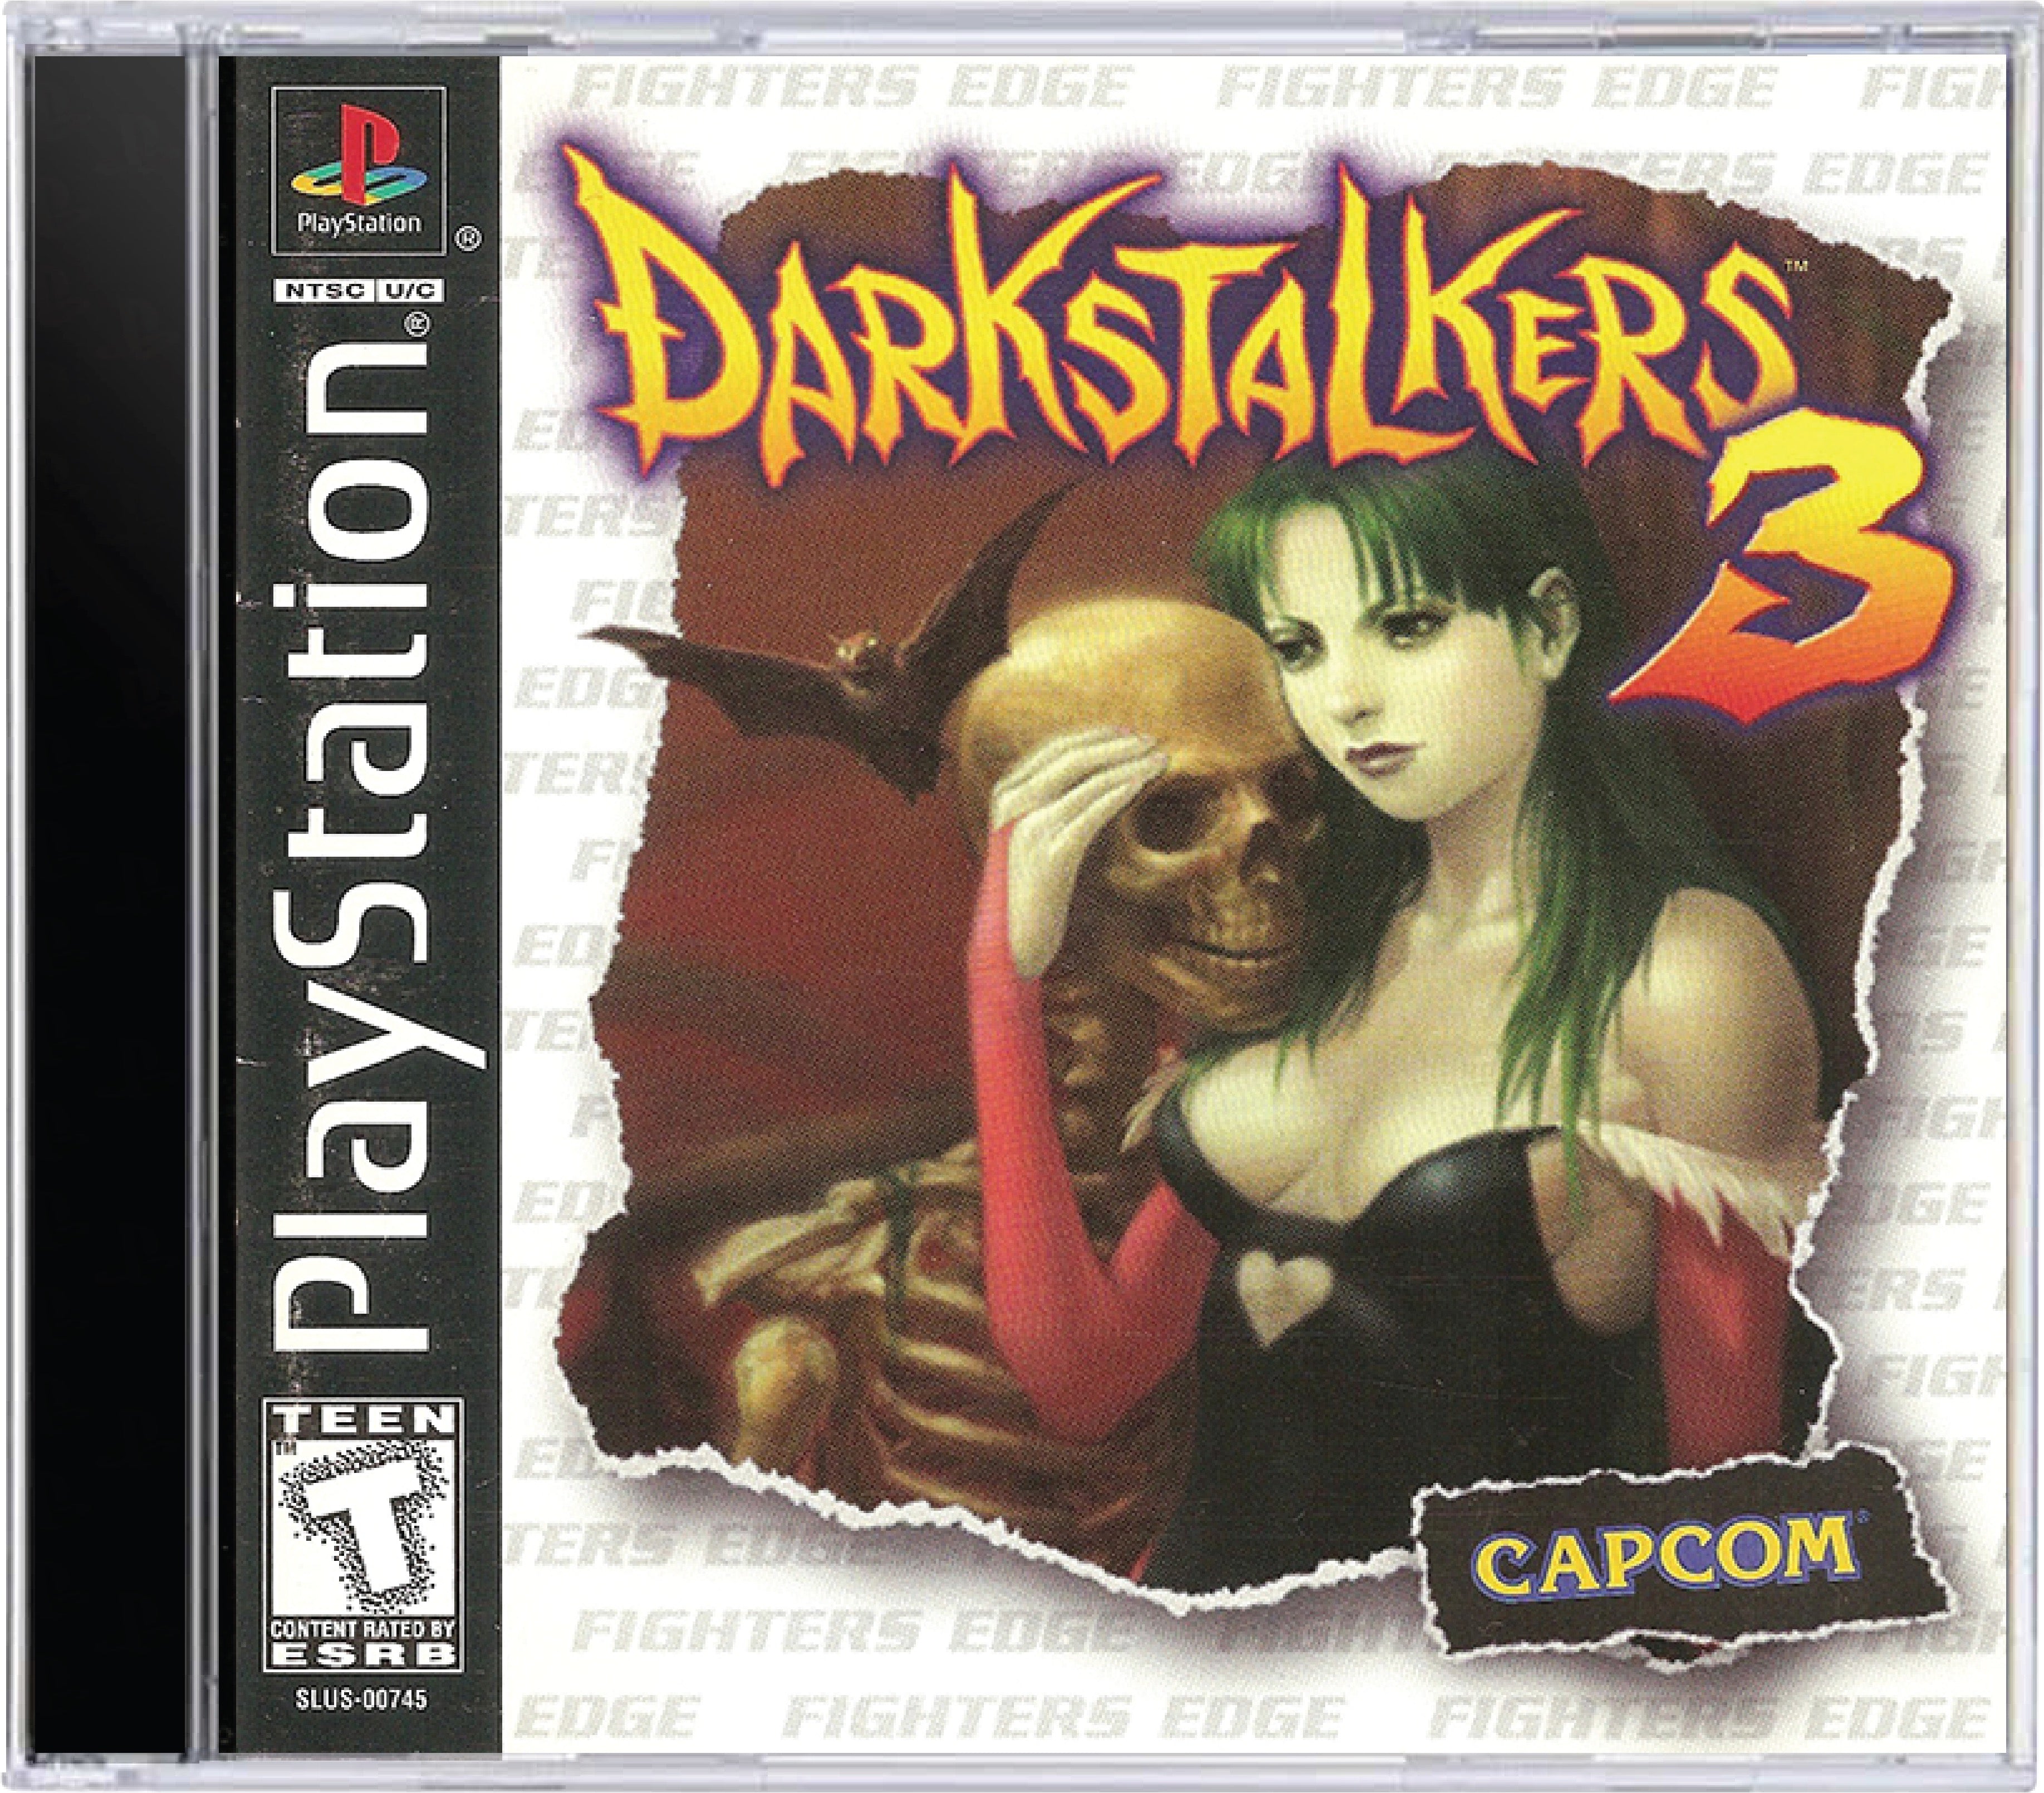 Darkstalkers 3 Cover Art and Product Photo